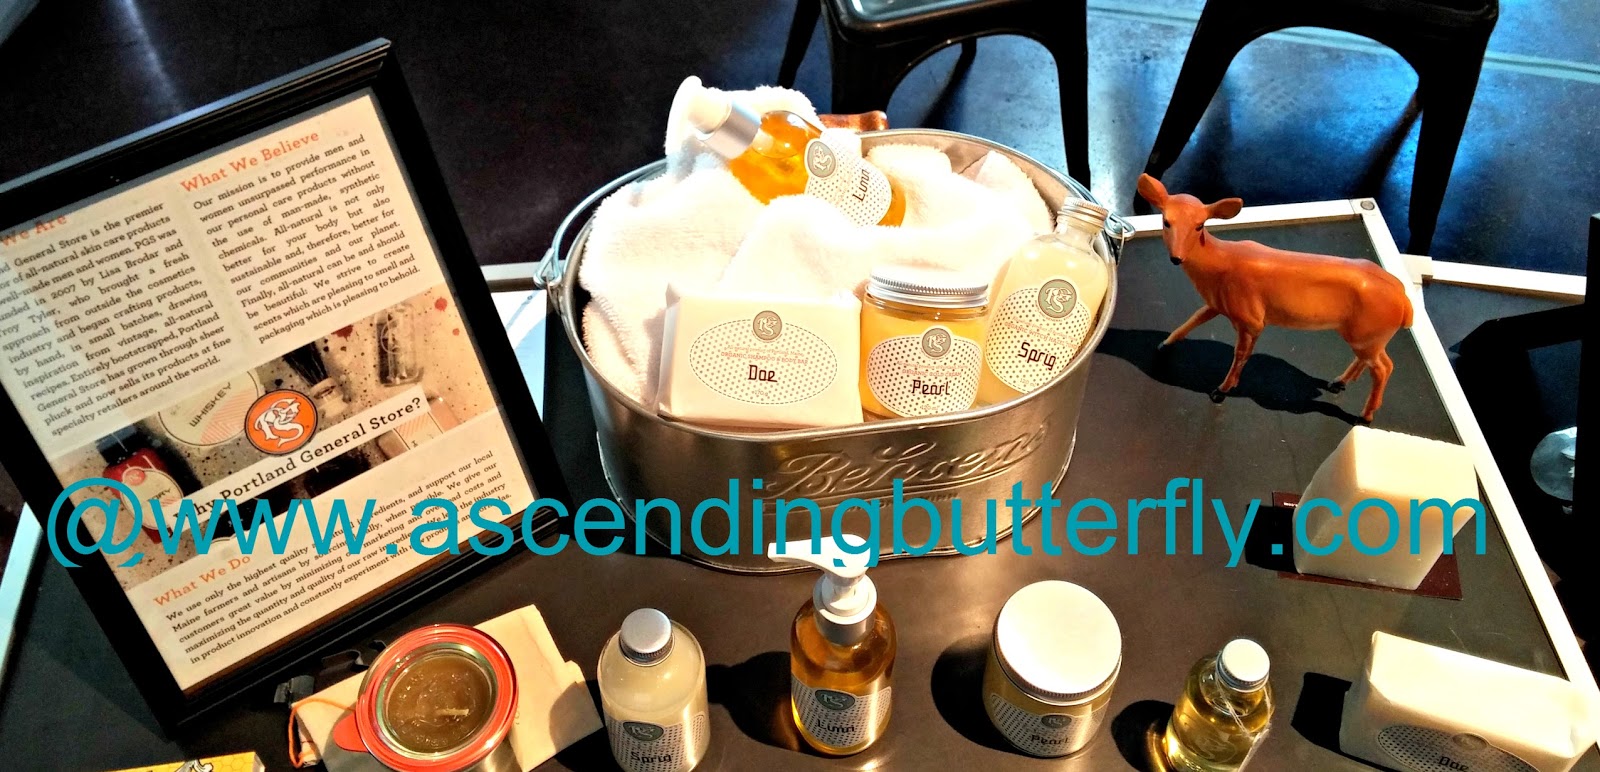 Products on Display during Elements Showcase New York City February 2014 Portland General Store Apothecary